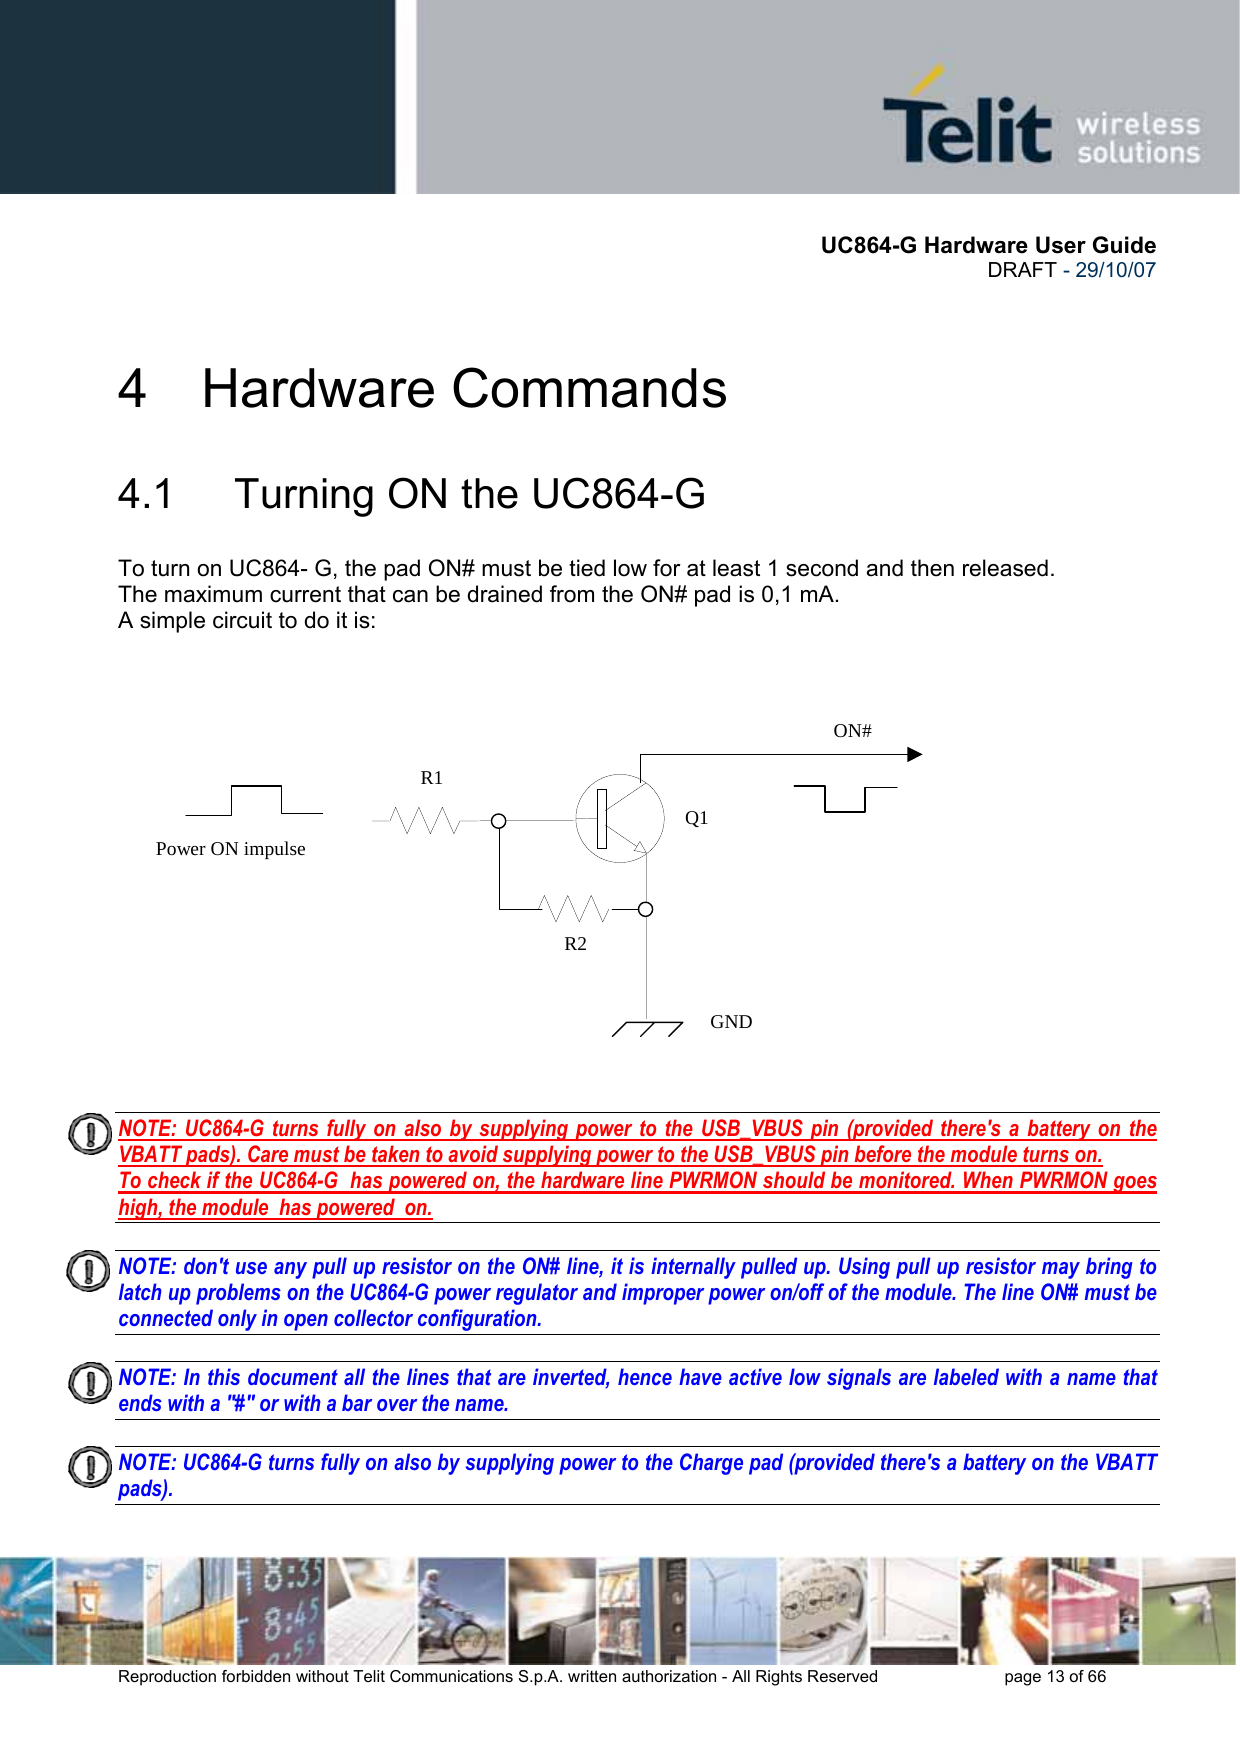       UC864-G Hardware User Guide  DRAFT - 29/10/07      Reproduction forbidden without Telit Communications S.p.A. written authorization - All Rights Reserved    page 13 of 66  4 Hardware Commands 4.1   Turning ON the UC864-G To turn on UC864- G, the pad ON# must be tied low for at least 1 second and then released. The maximum current that can be drained from the ON# pad is 0,1 mA. A simple circuit to do it is:     NOTE: UC864-G turns fully on also by supplying power to the USB_VBUS pin (provided there&apos;s a battery on the VBATT pads). Care must be taken to avoid supplying power to the USB_VBUS pin before the module turns on.  To check if the UC864-G  has powered on, the hardware line PWRMON should be monitored. When PWRMON goes high, the module  has powered  on.  NOTE: don&apos;t use any pull up resistor on the ON# line, it is internally pulled up. Using pull up resistor may bring to latch up problems on the UC864-G power regulator and improper power on/off of the module. The line ON# must be connected only in open collector configuration.  NOTE: In this document all the lines that are inverted, hence have active low signals are labeled with a name that ends with a &quot;#&quot; or with a bar over the name.  NOTE: UC864-G turns fully on also by supplying power to the Charge pad (provided there&apos;s a battery on the VBATT pads).    ON#Power ON impulse  GNDR1R2Q1